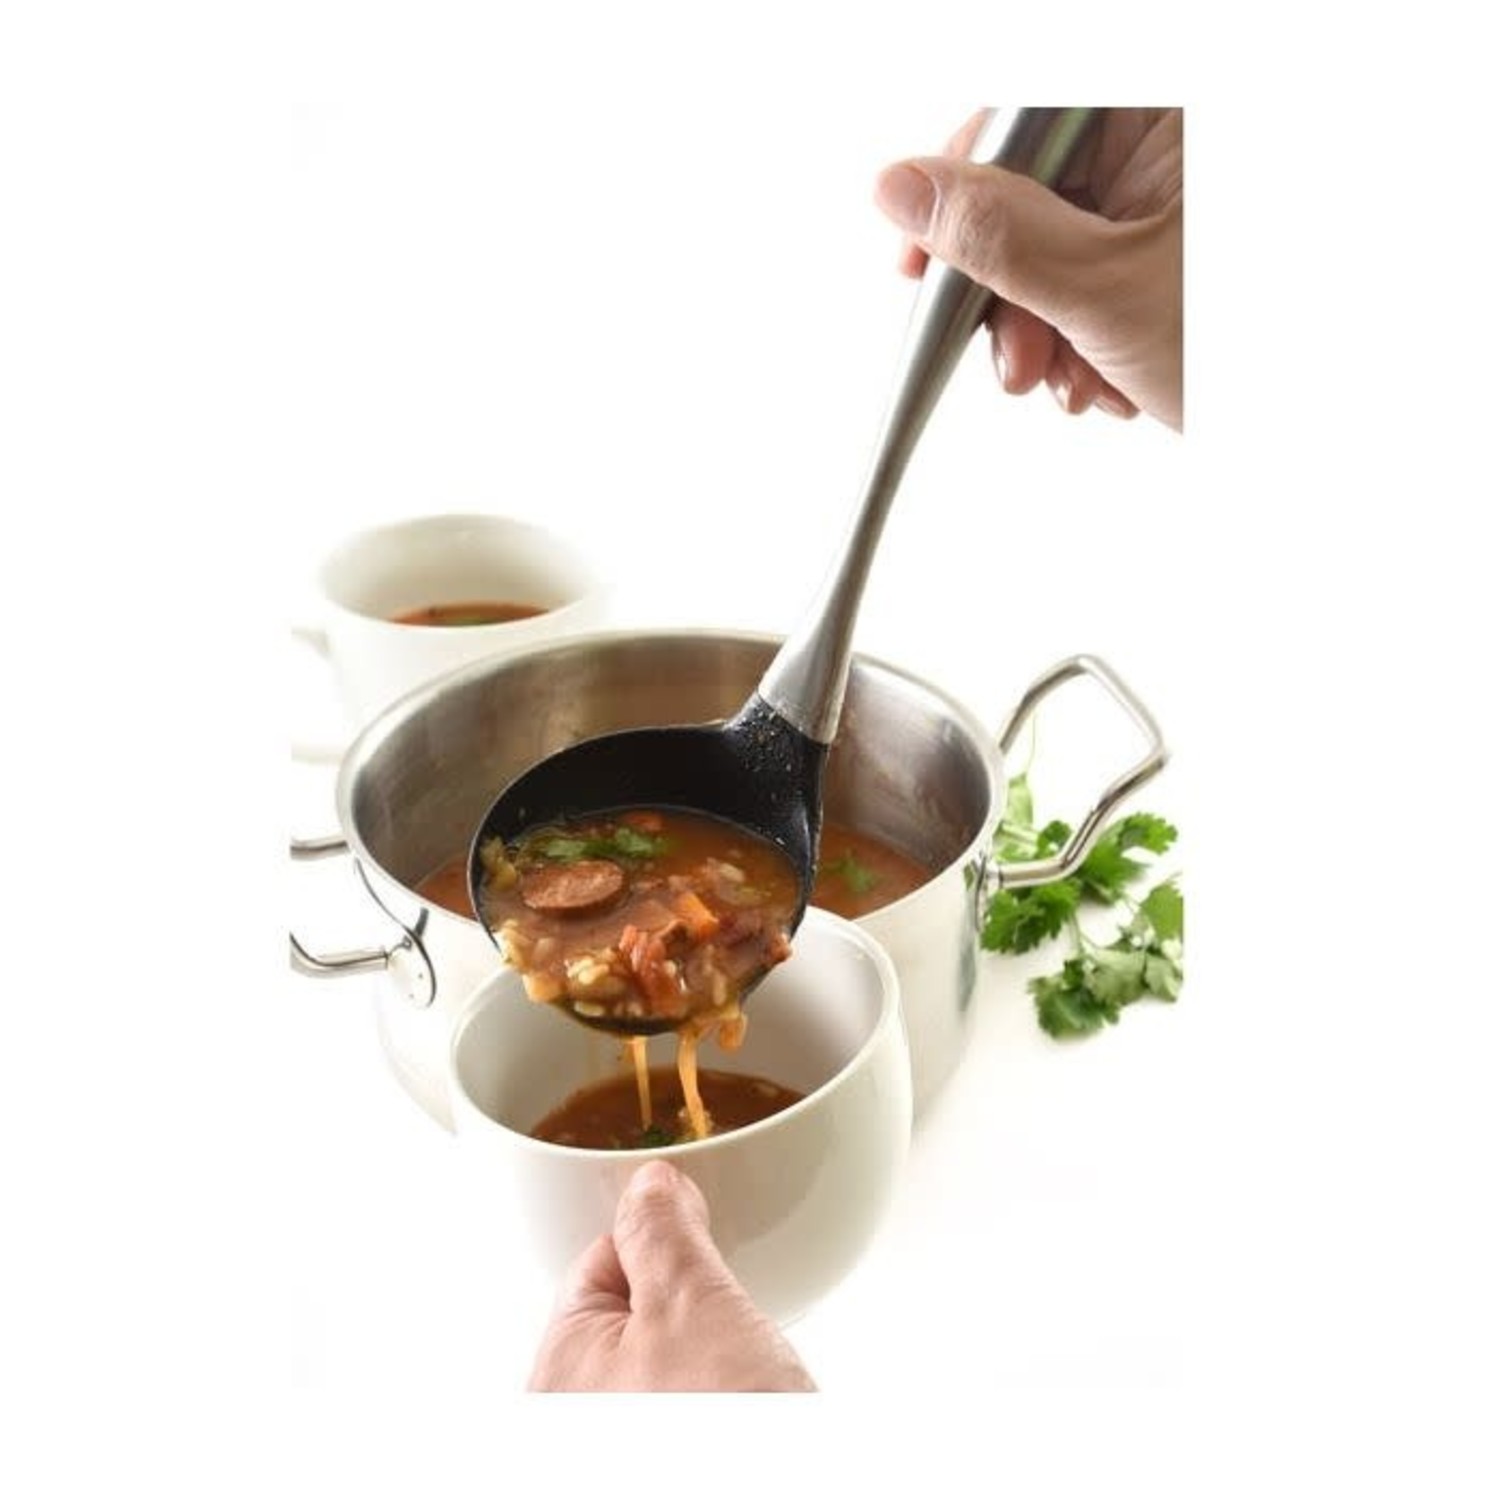 https://cdn.shoplightspeed.com/shops/633447/files/44972310/1500x4000x3/silicone-ladle-with-stainless-steel-handle.jpg